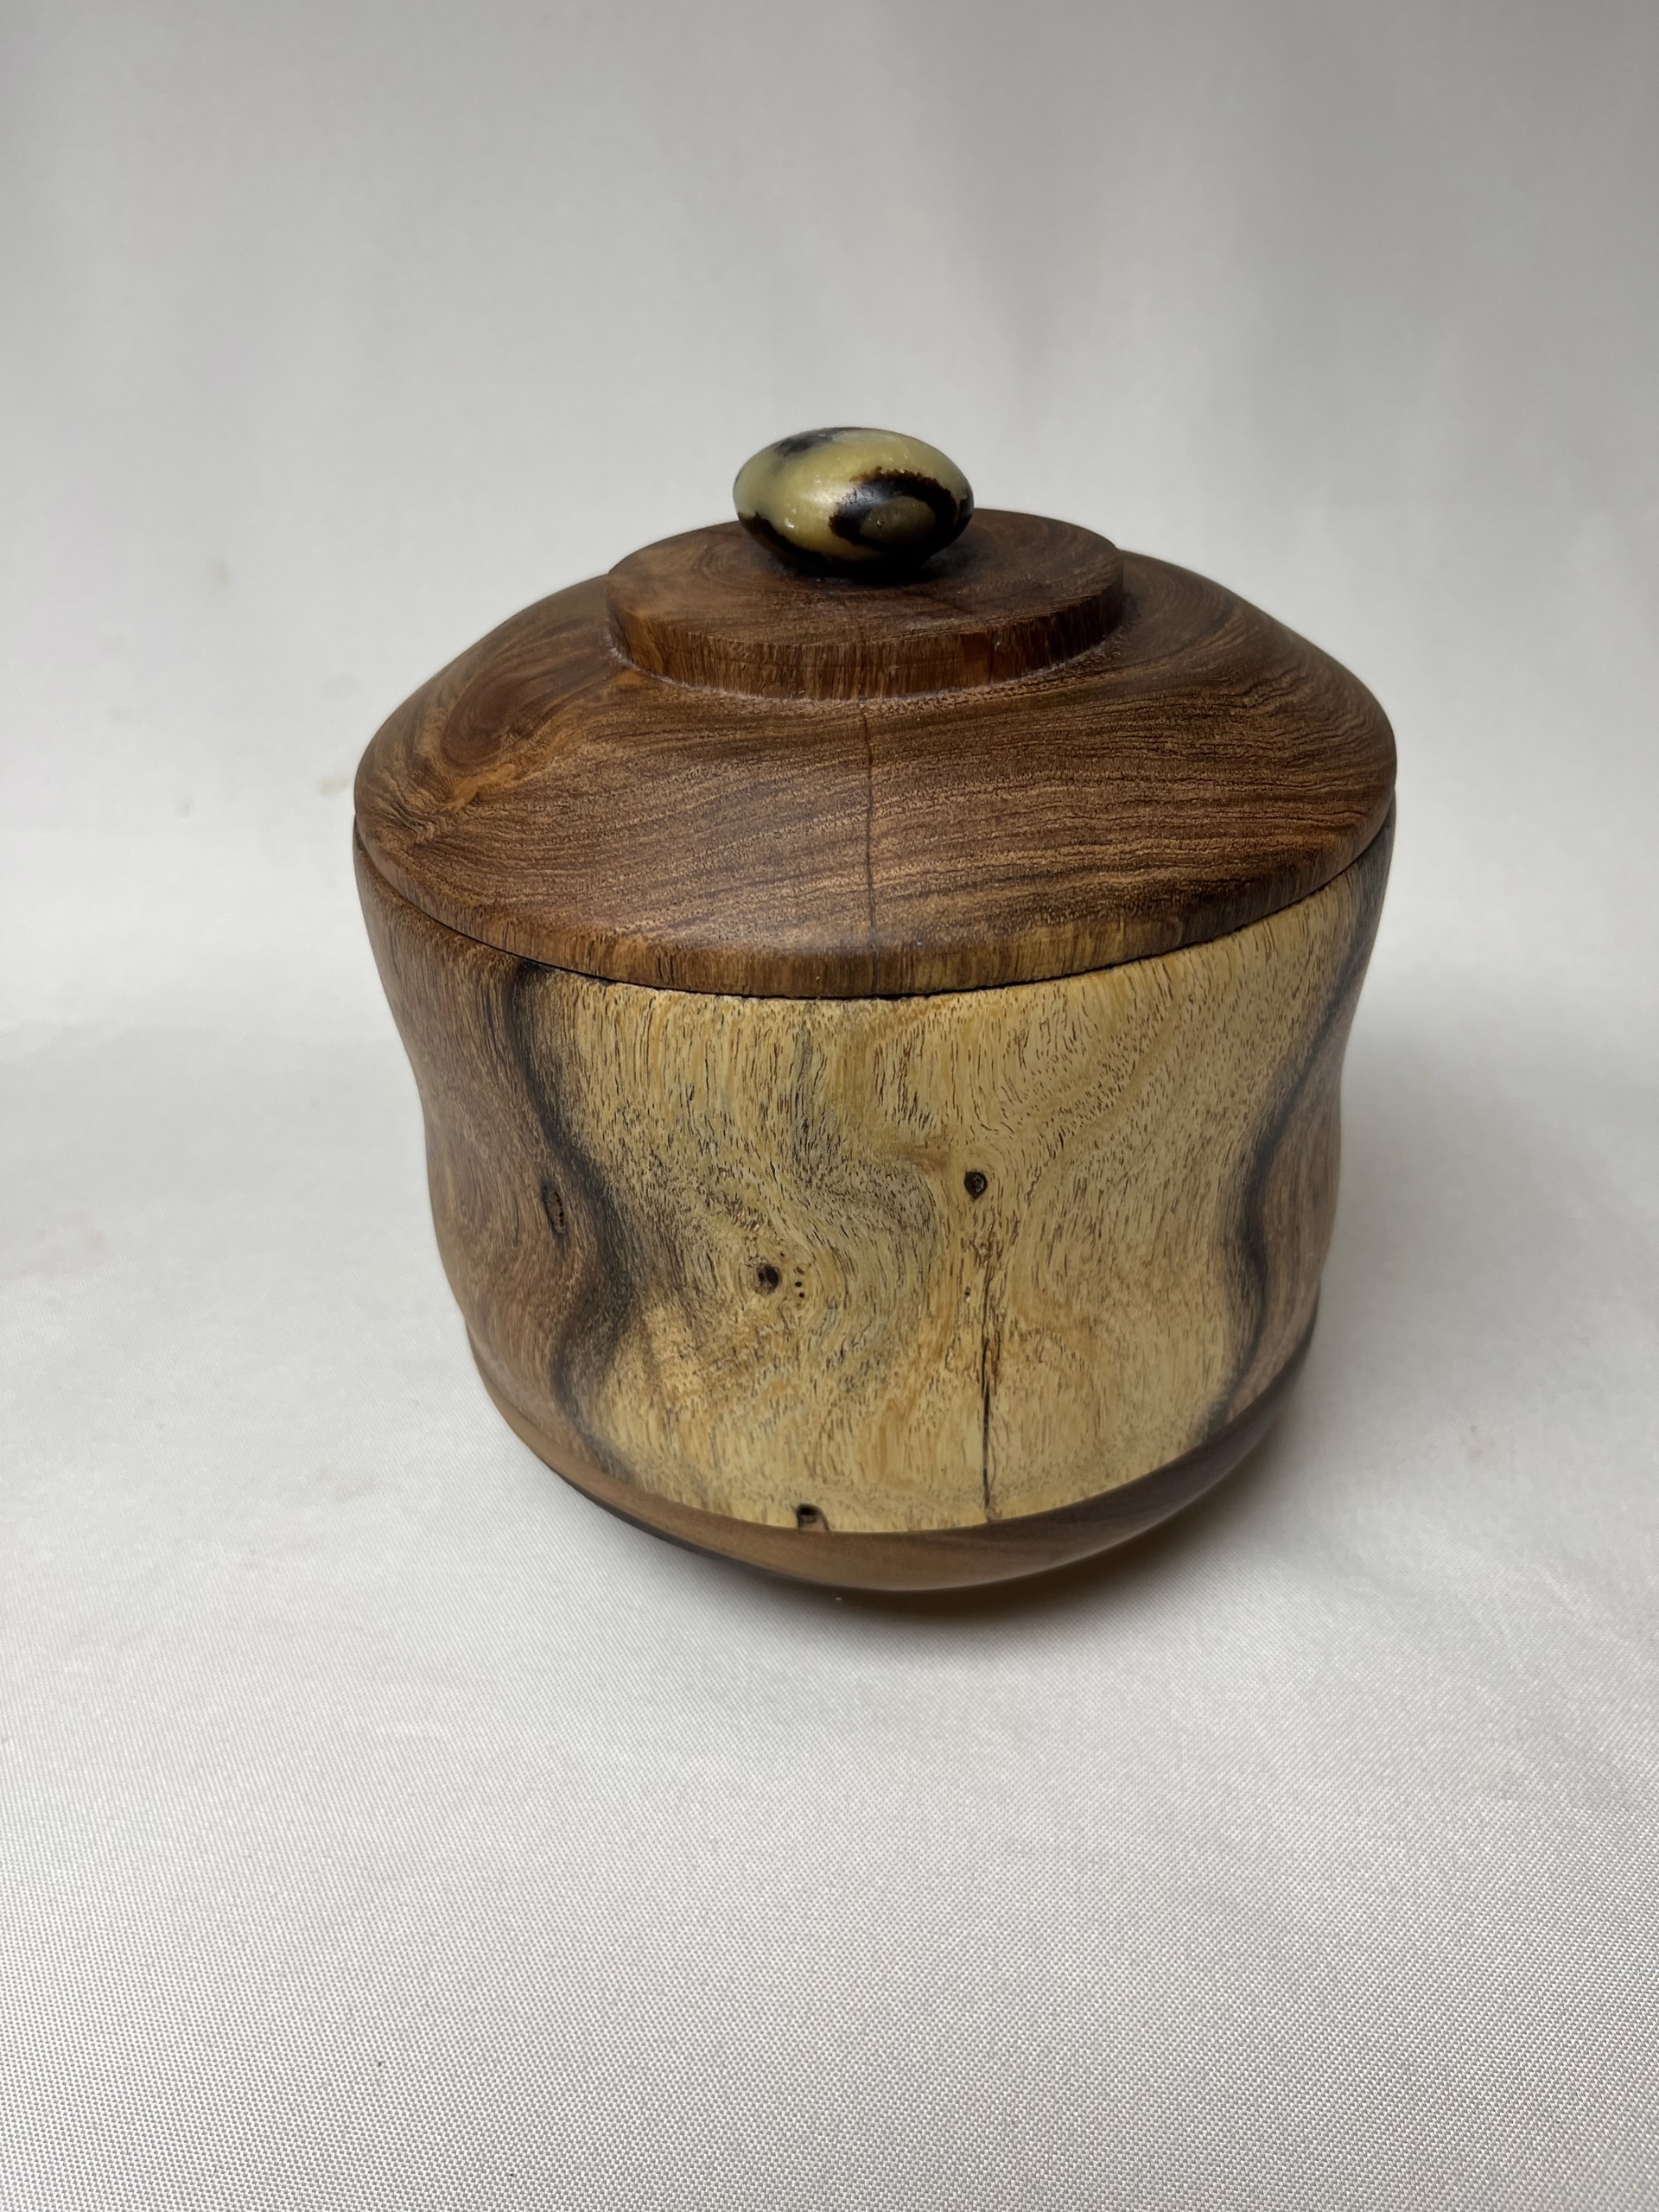 Turned Wood Jar W/Lid #21-126 by Rick Squires